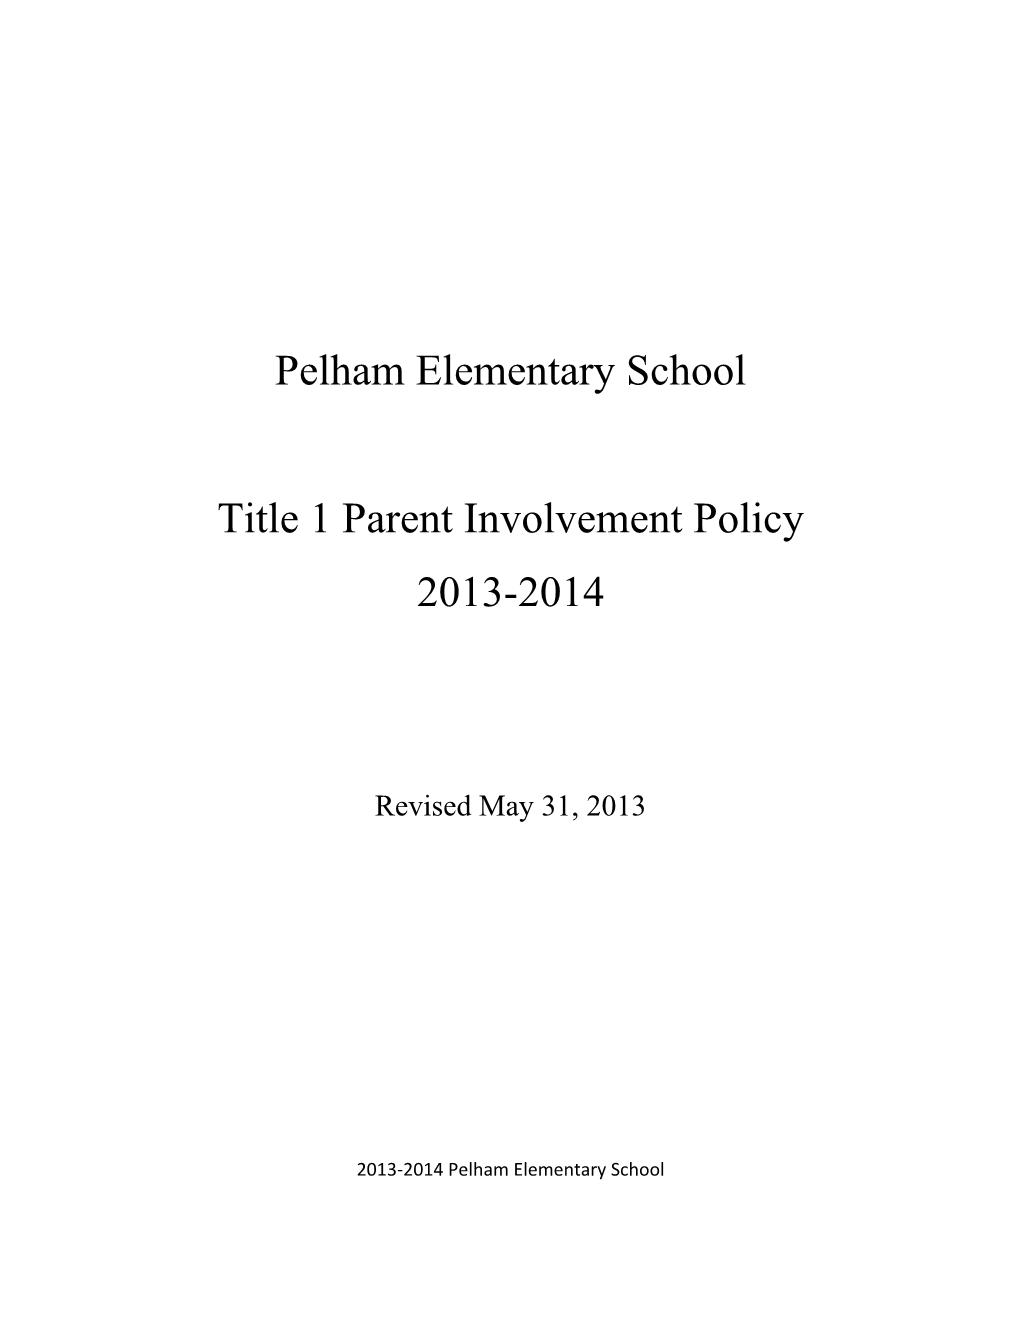 Title 1 Parent Involvement Policy